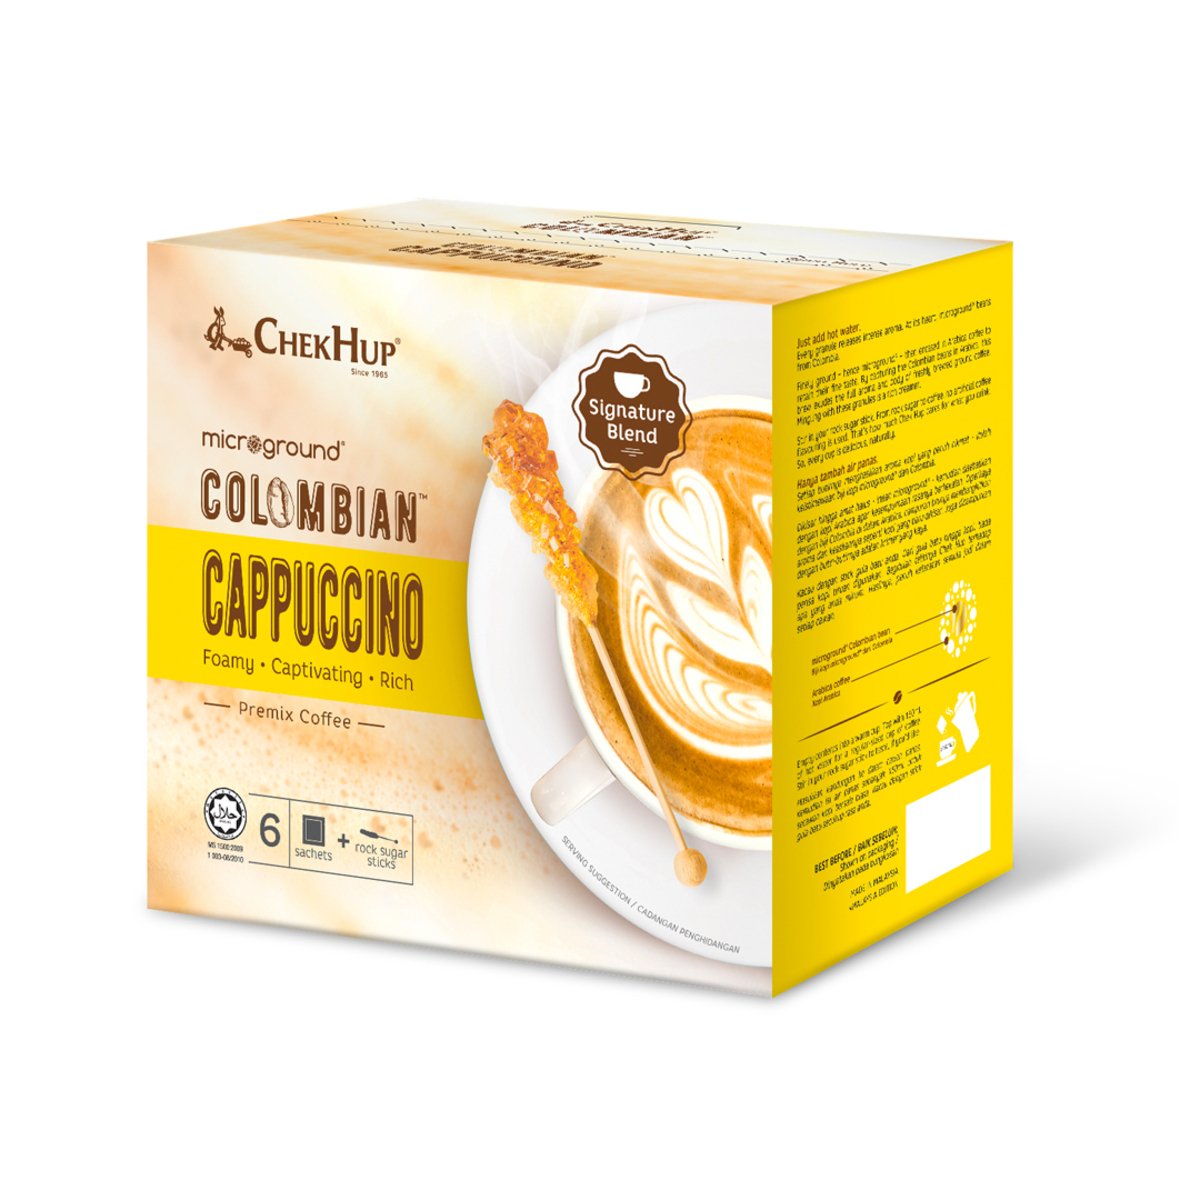 Chek Hup Micro Ground Colombian Cappuccino 23g X 6's